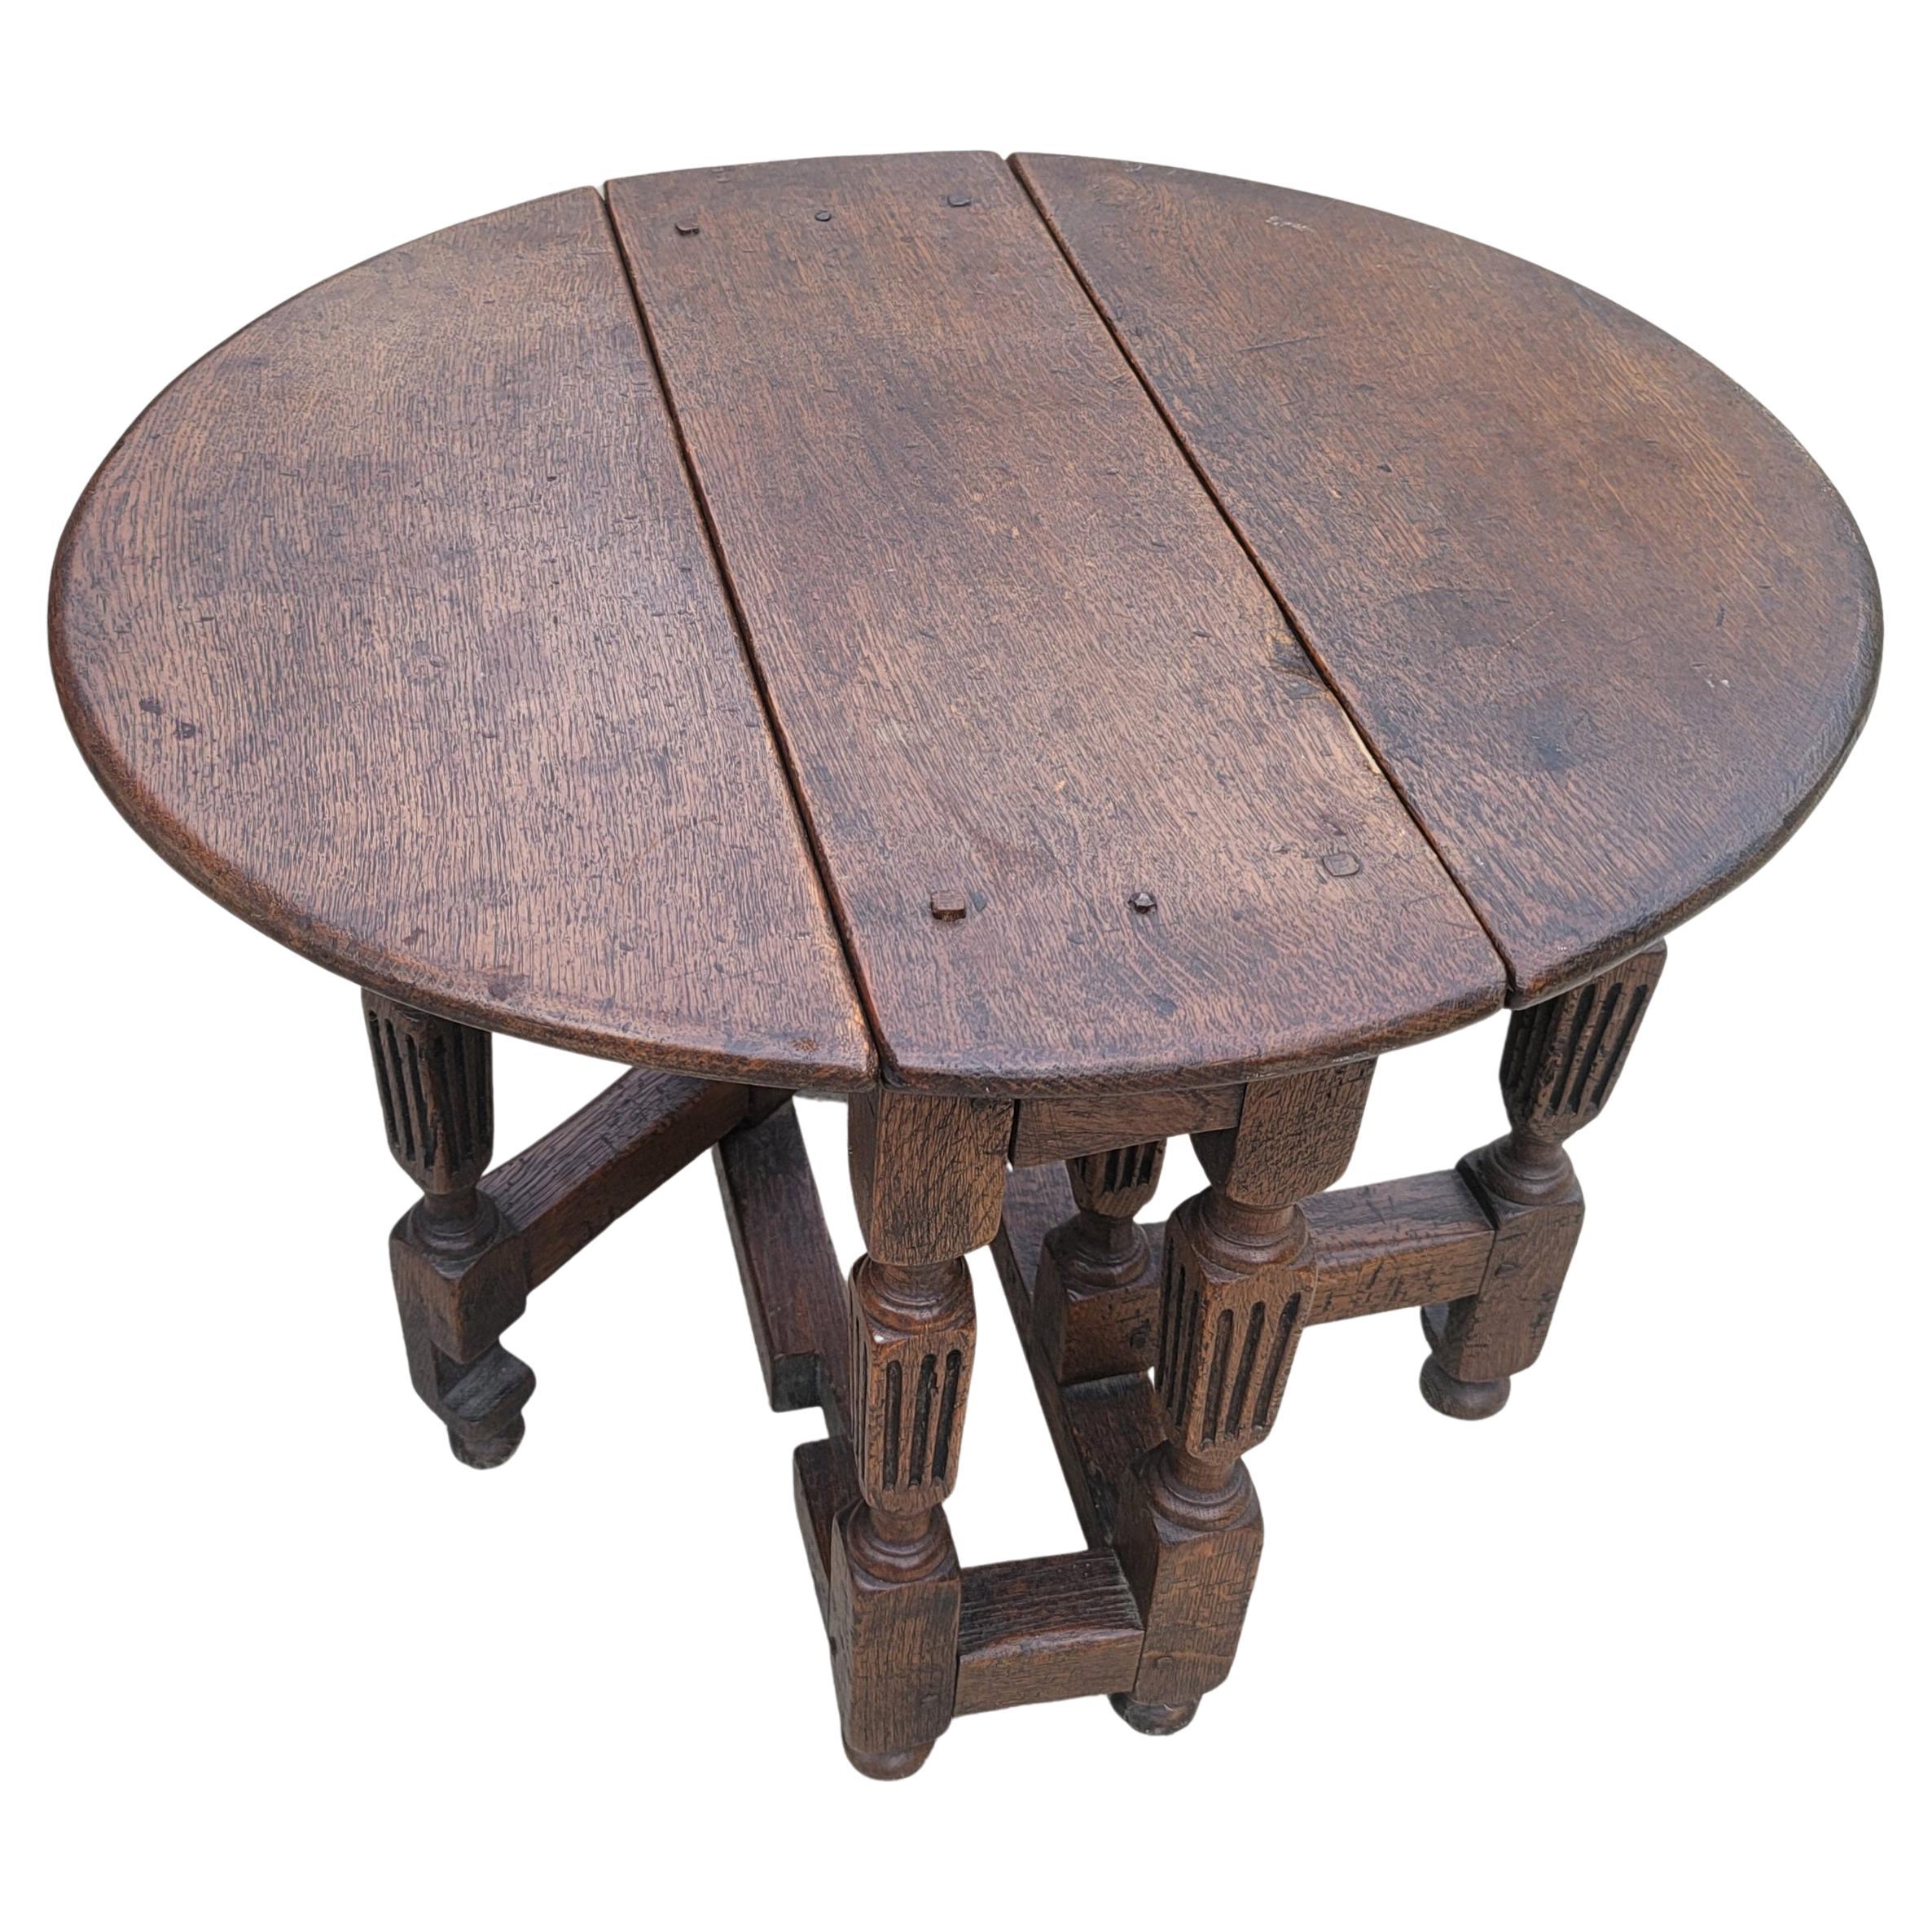 George III Style Oak Diminutive Drop-Leaf Gate-Leg table. Use it as small center table,or as a side table. This table is made off of 100% solid oak. Measures 23.5